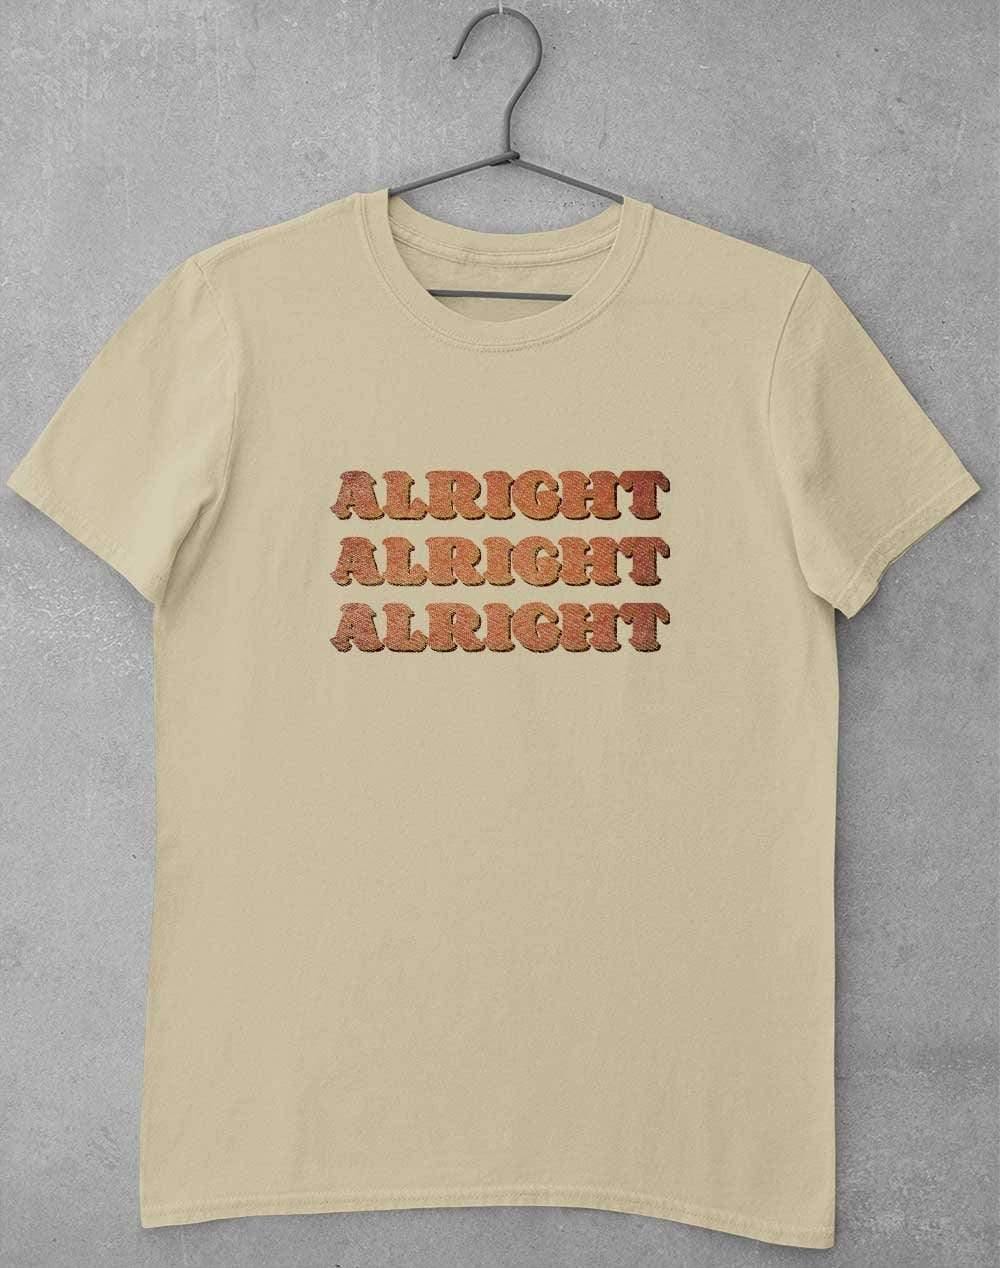 Alright Alright Alright T-Shirt S / Sand  - Off World Tees